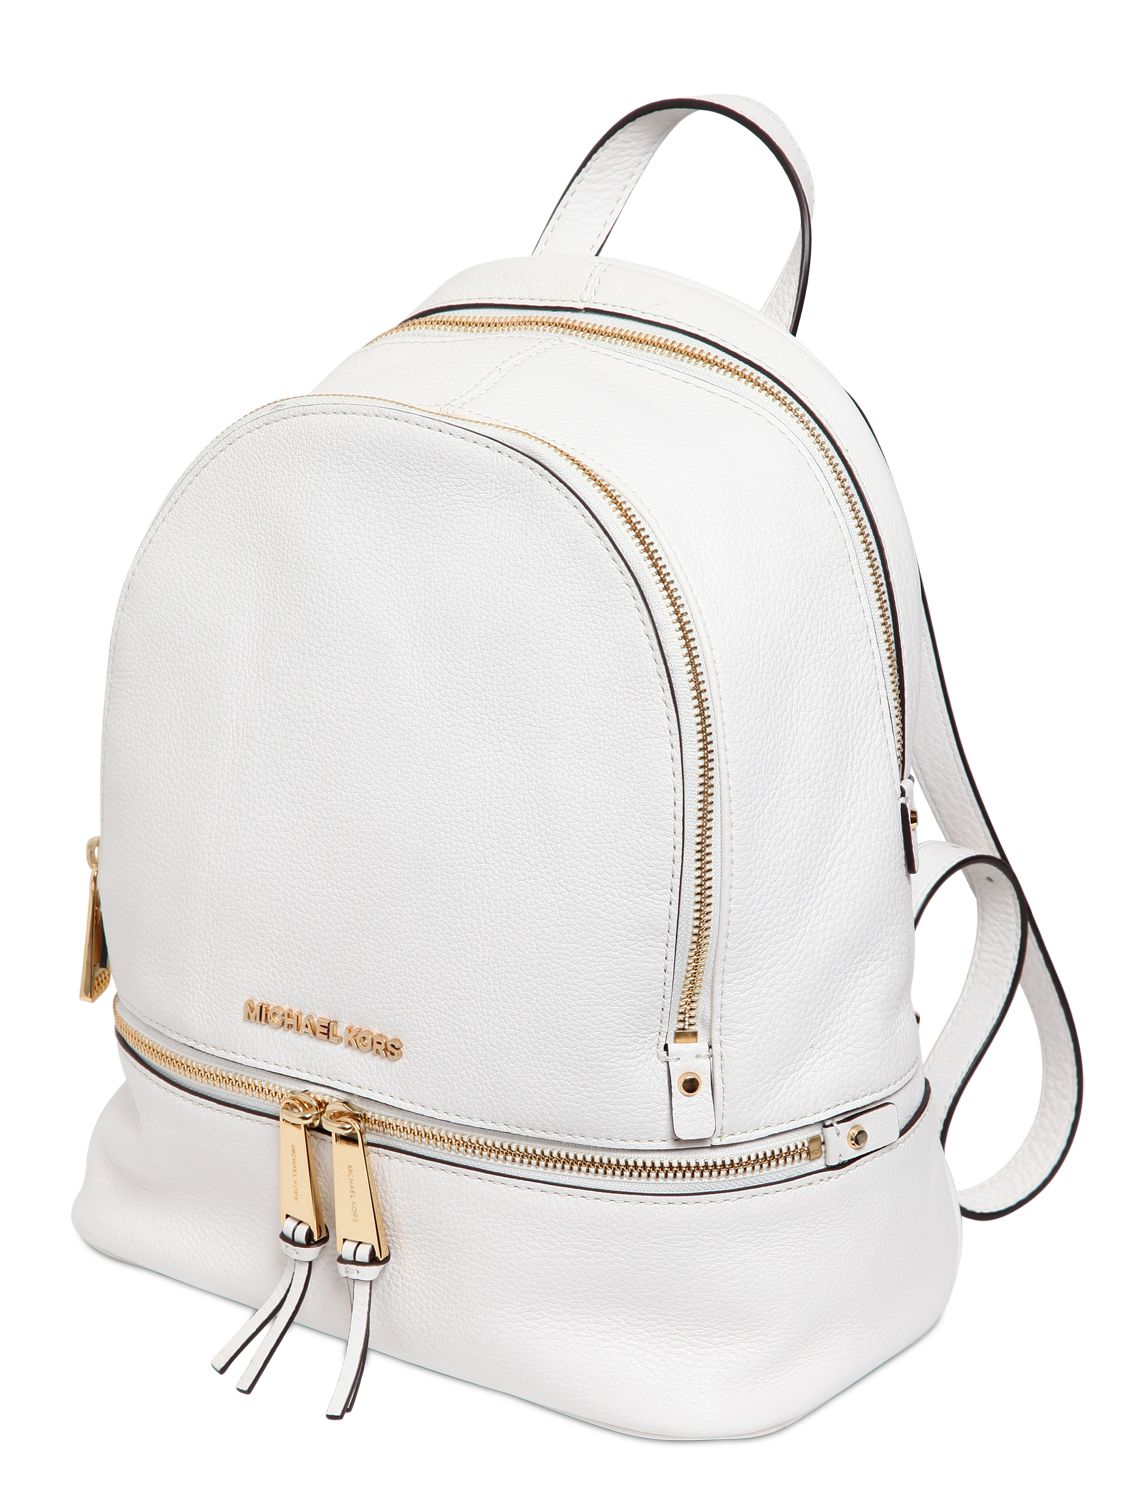 MICHAEL Michael Kors Reha Leather Small Backpack in White for Men - Lyst